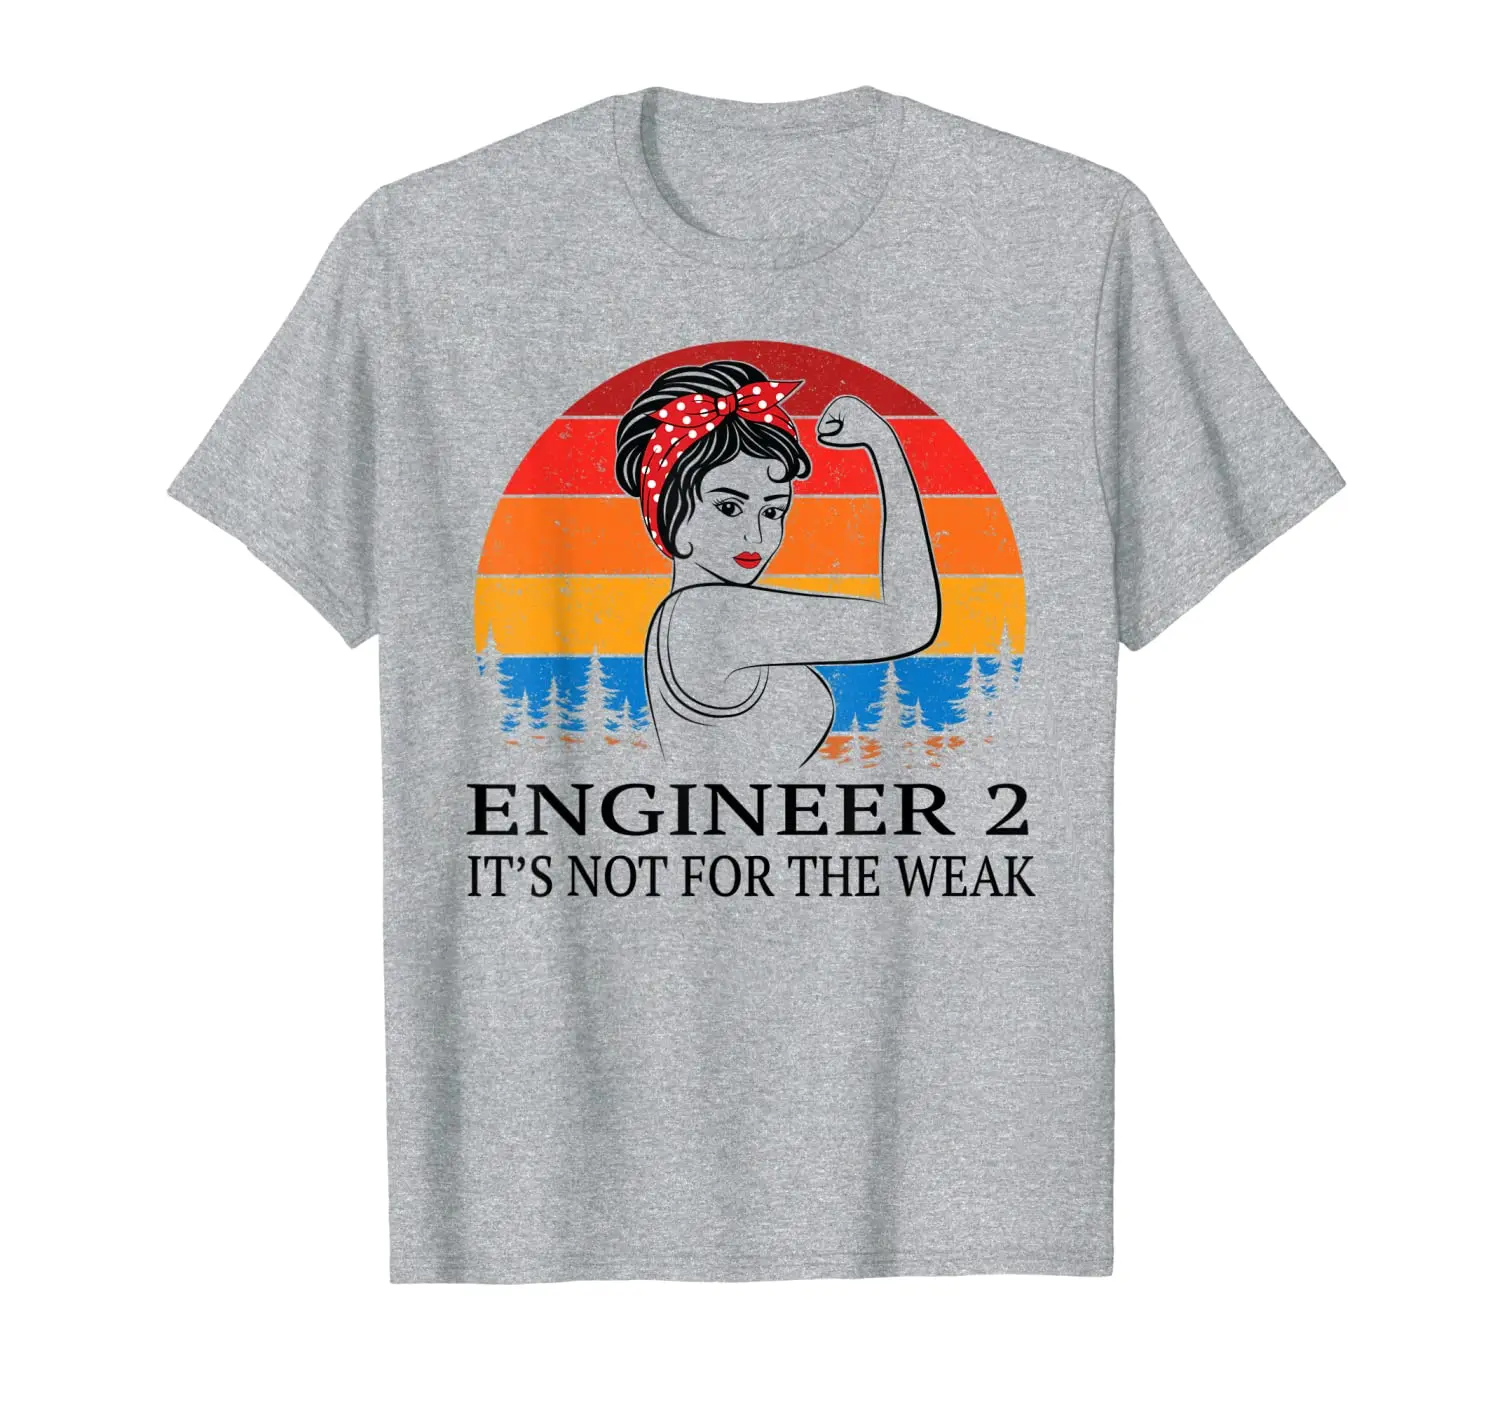 Engineer 2 Not For The Weak Vintage 80s T-Shirt